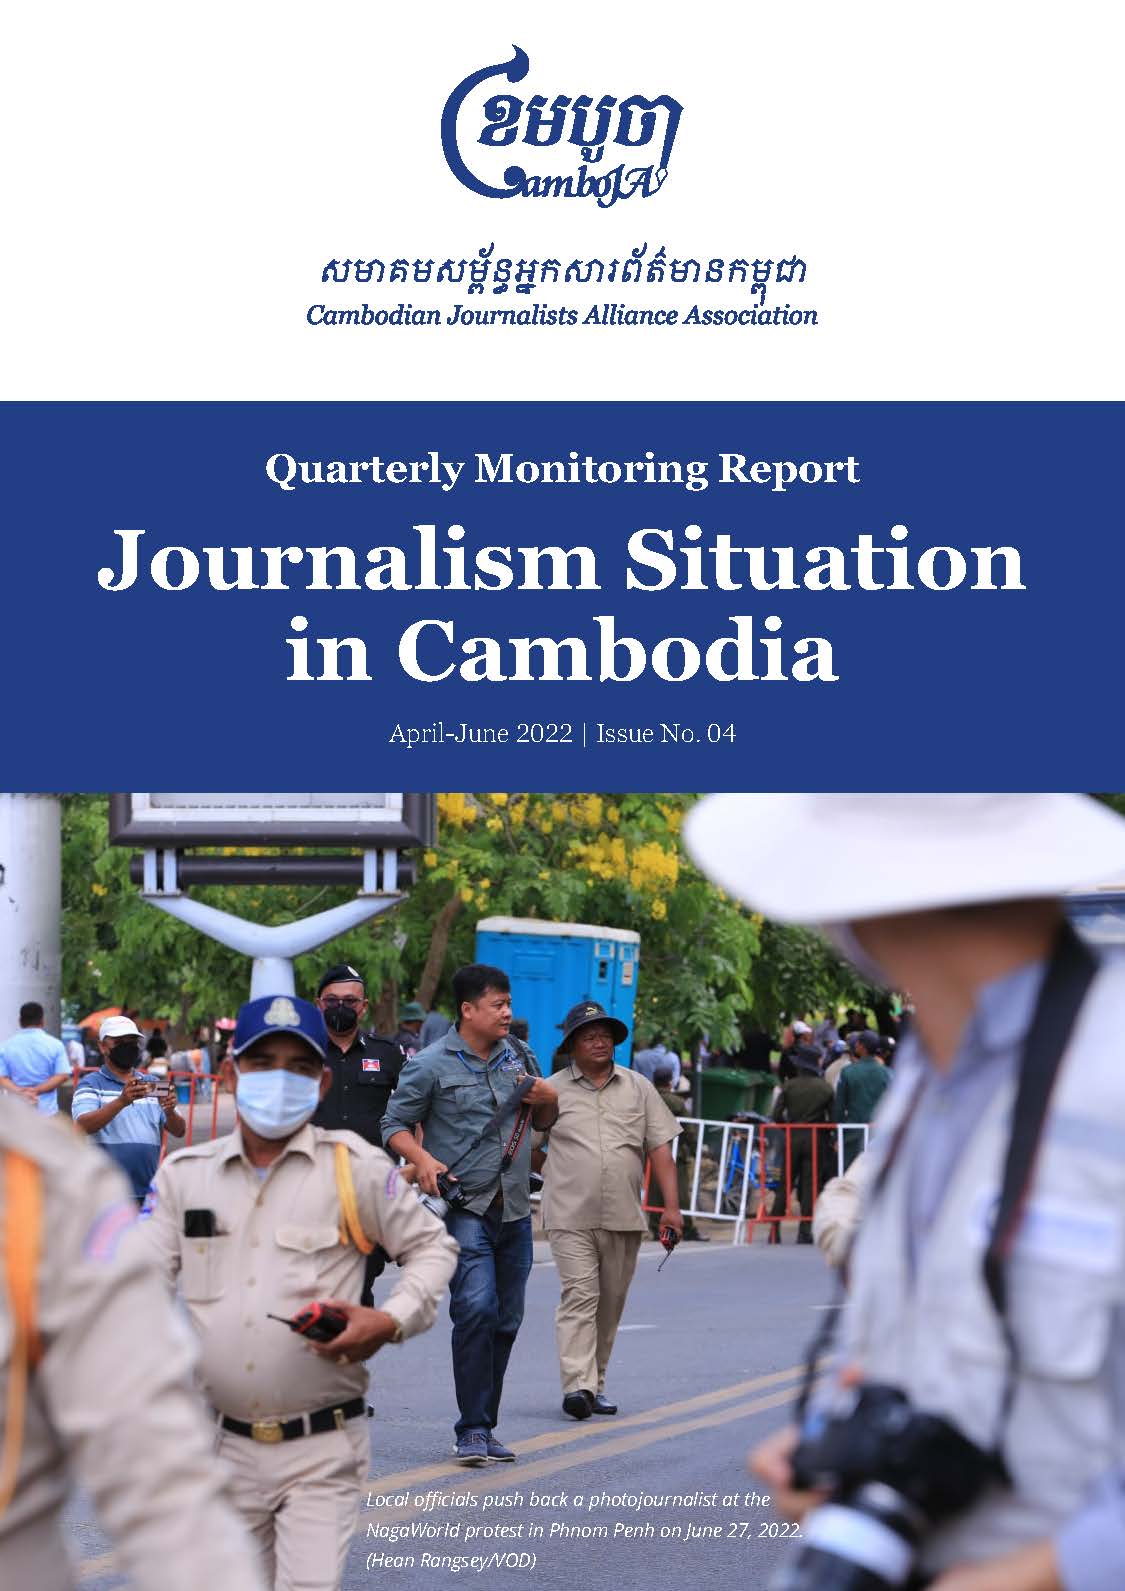 Quarterly Monitoring Report on Journalism Situation in Cambodia (April – June 2022)